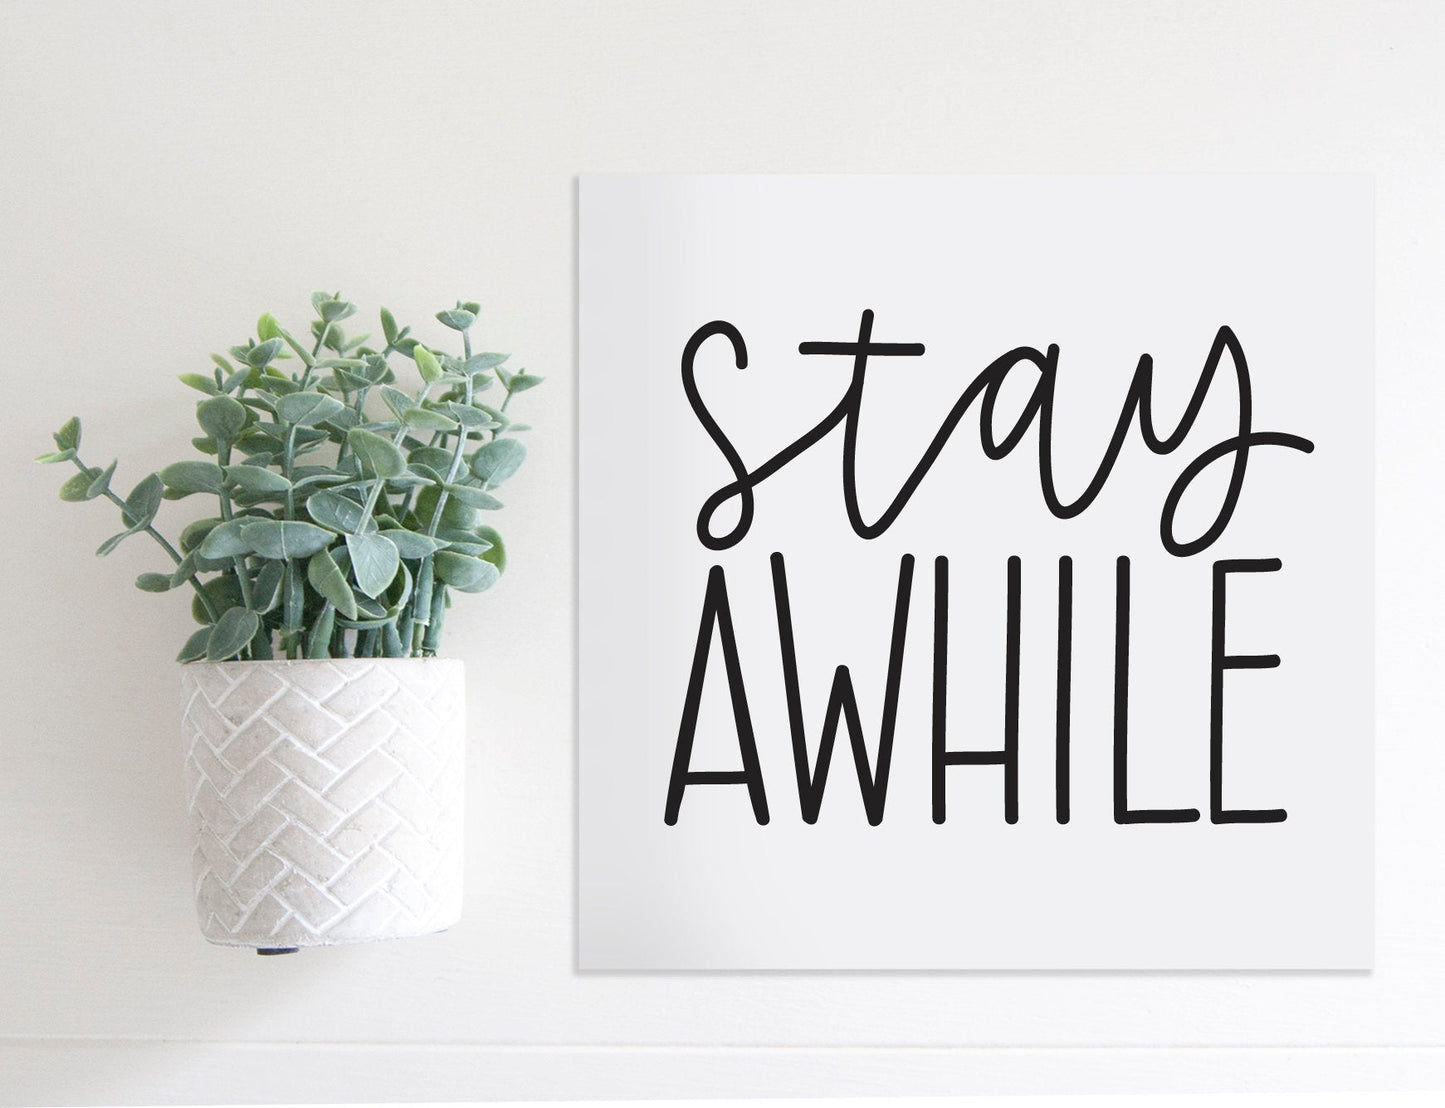 Medium Size Sign Insert: Stay Awhile | Magnetic Sign INSERT ONLY